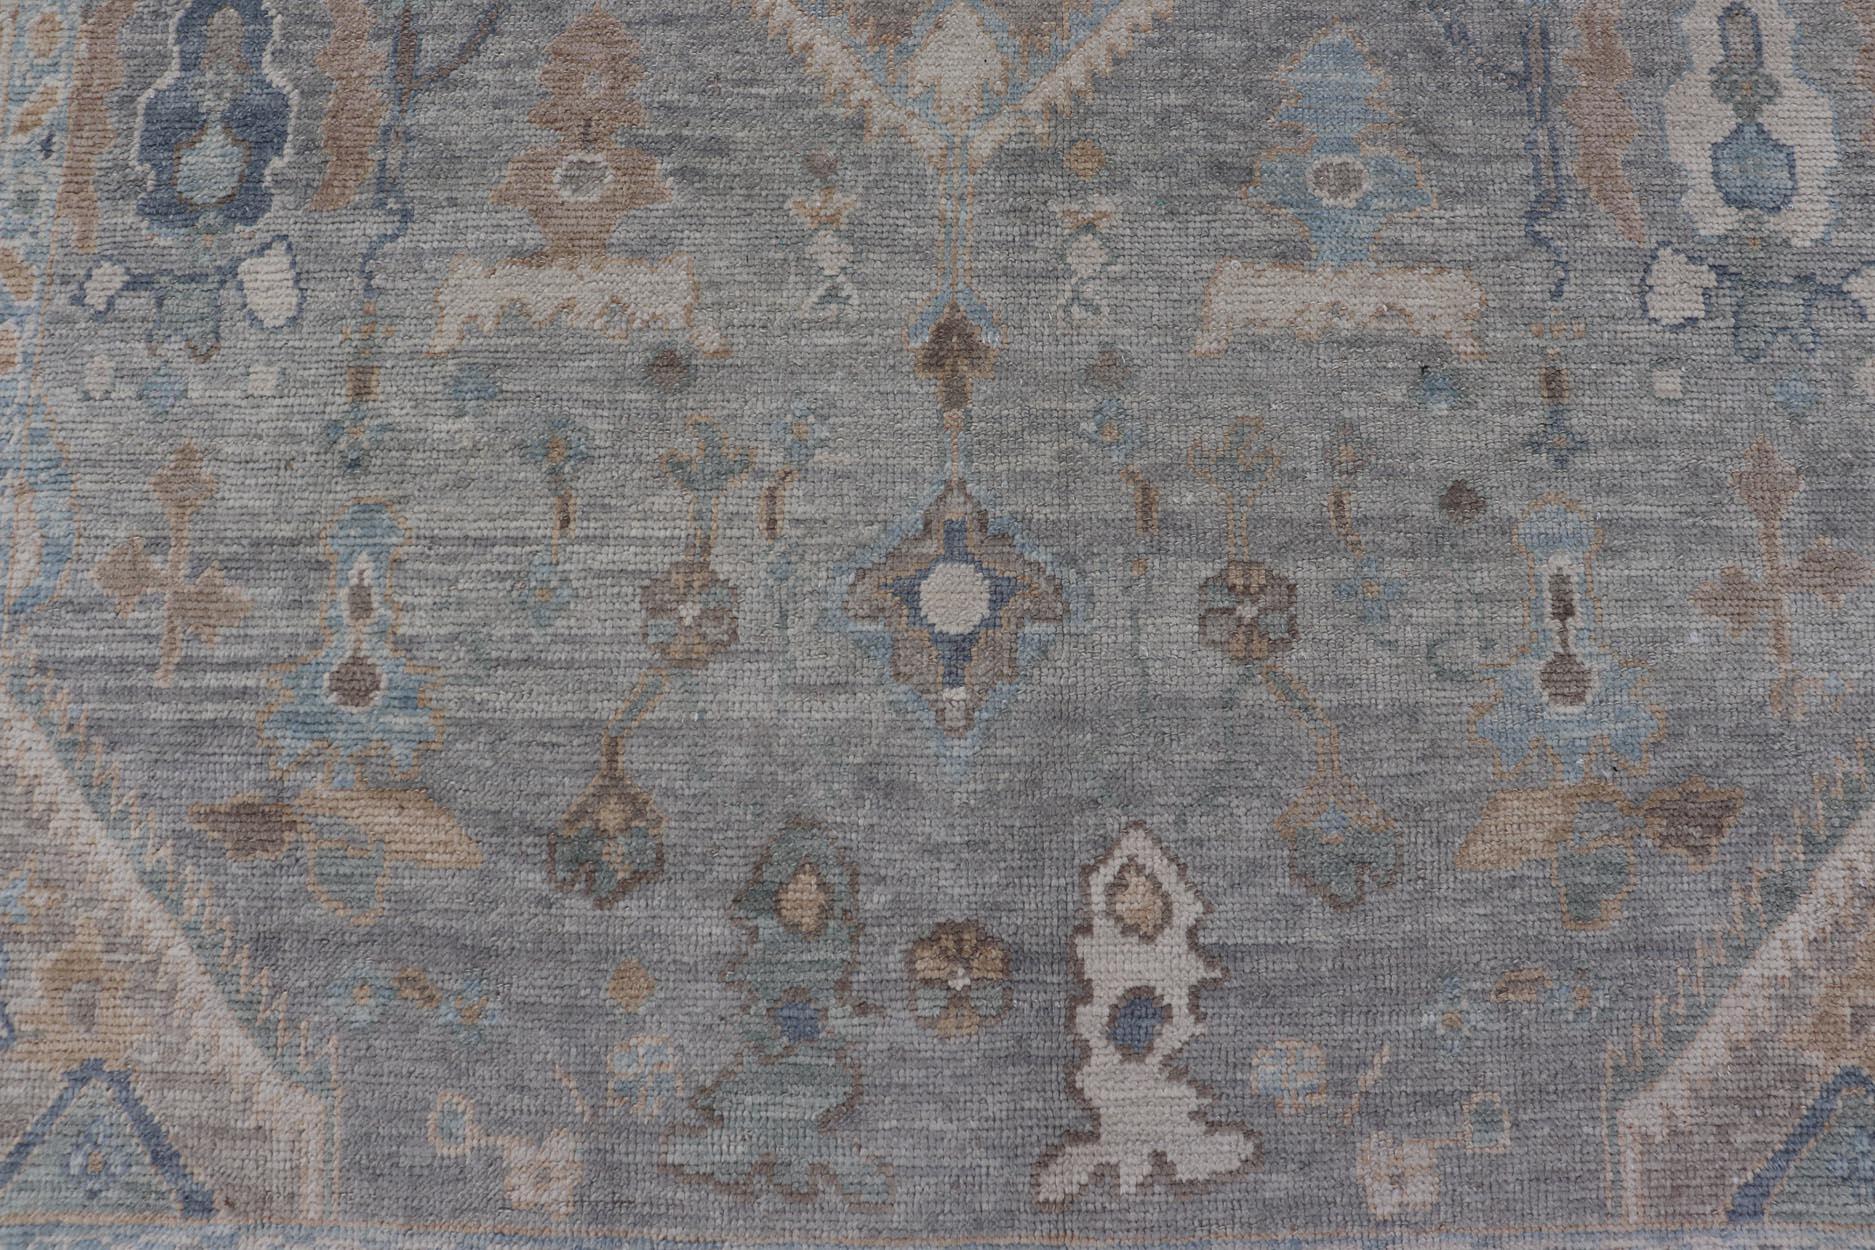 Measures: 7'3 x 10'4 
Turkish Modern Oushak Rug in Medallion Design in Gray-Blue, and Marigold. Keivan Woven Arts / rug EN-15208, country of origin / type: Turkey / Oushak

This traditional Oushak rug from Turkey features a subdued, neutral color